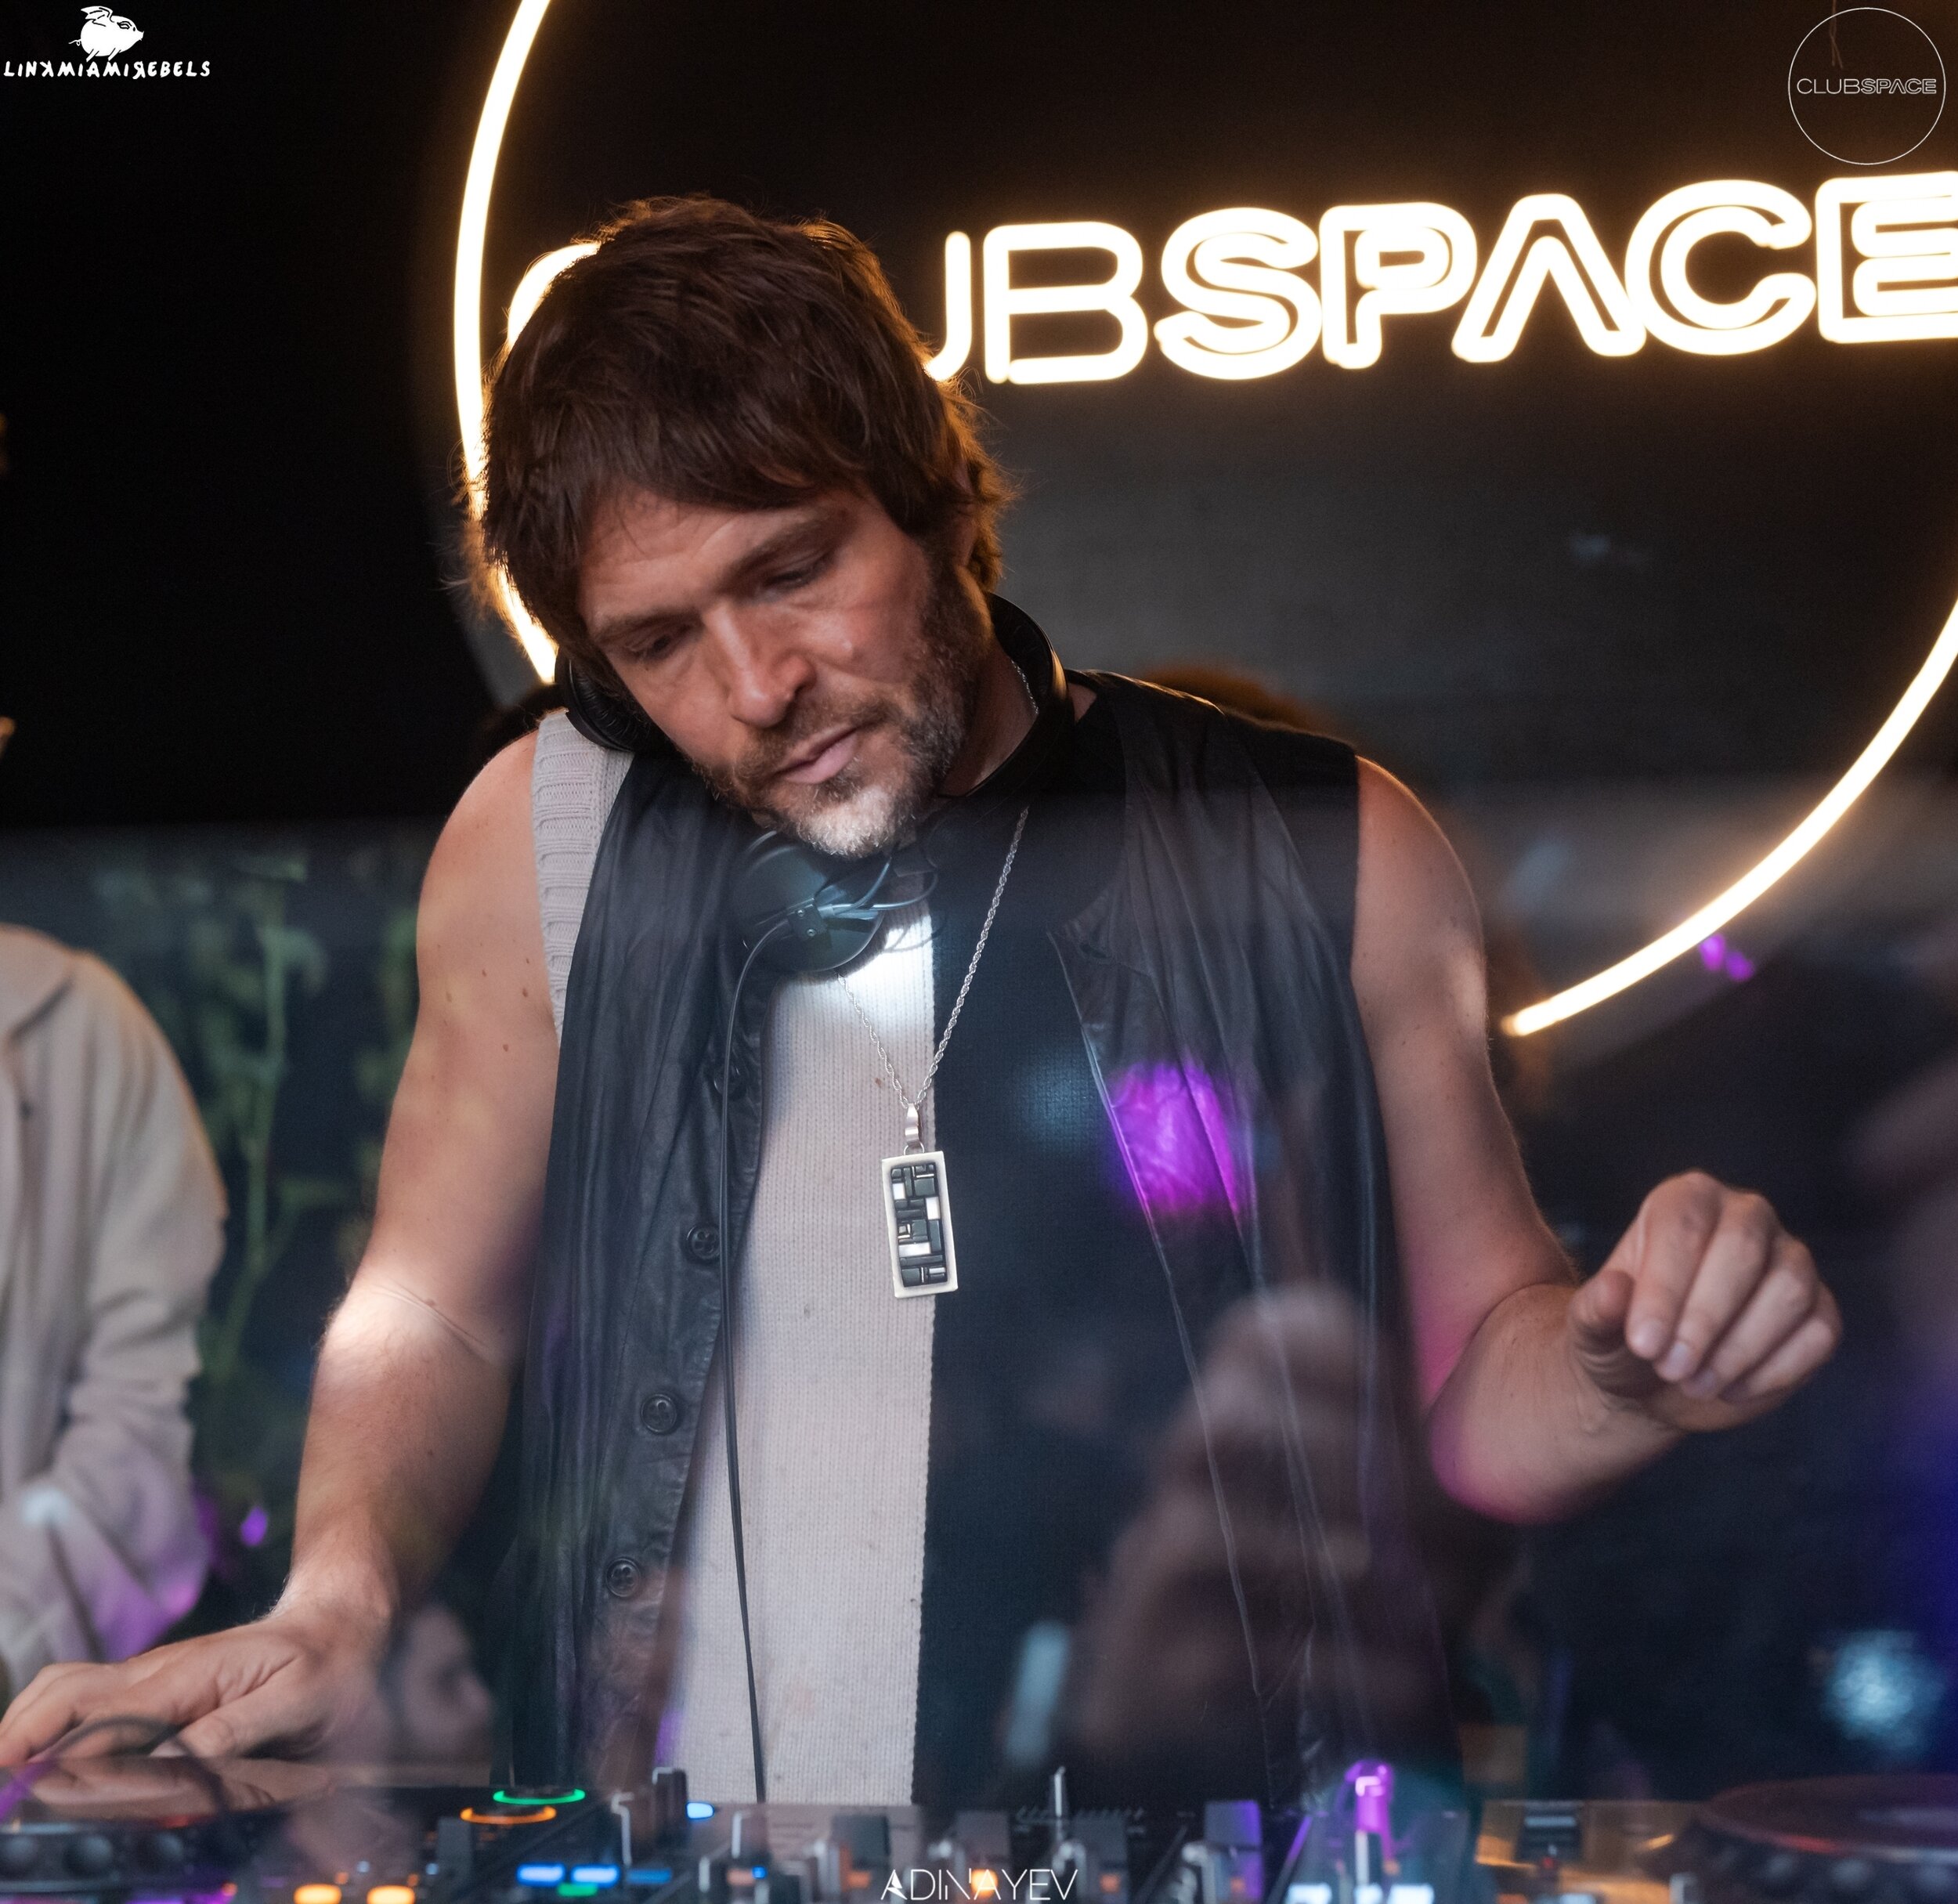 Lee Foss 2-6-21 — CLUB SPACE